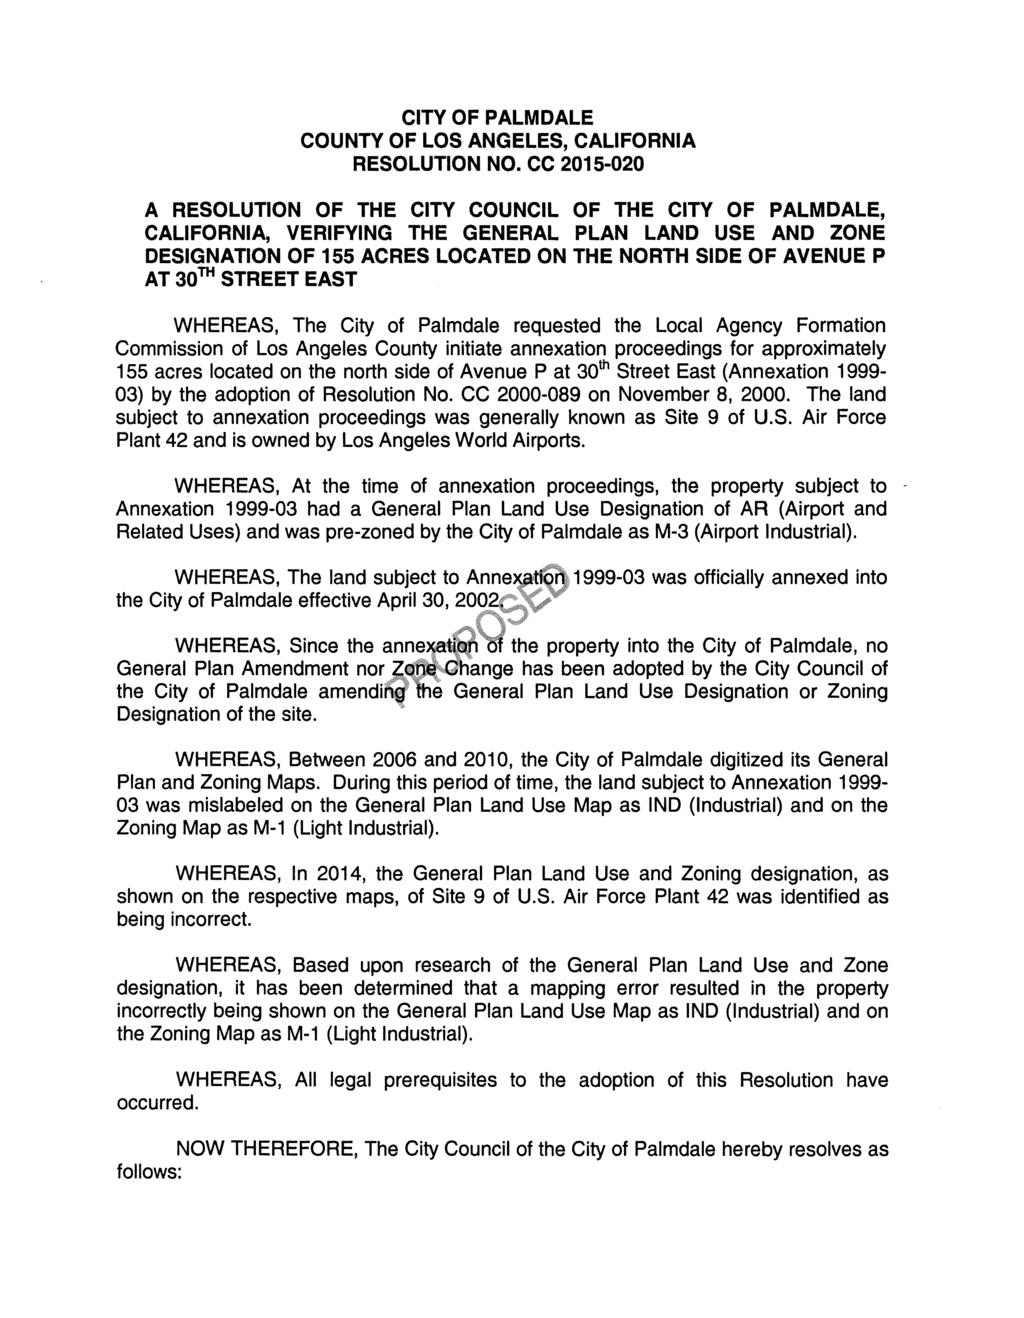 CITY OF PALMDALE COUNTY OF LOS ANGELES, CALIFORNIA RESOLUTION NO.